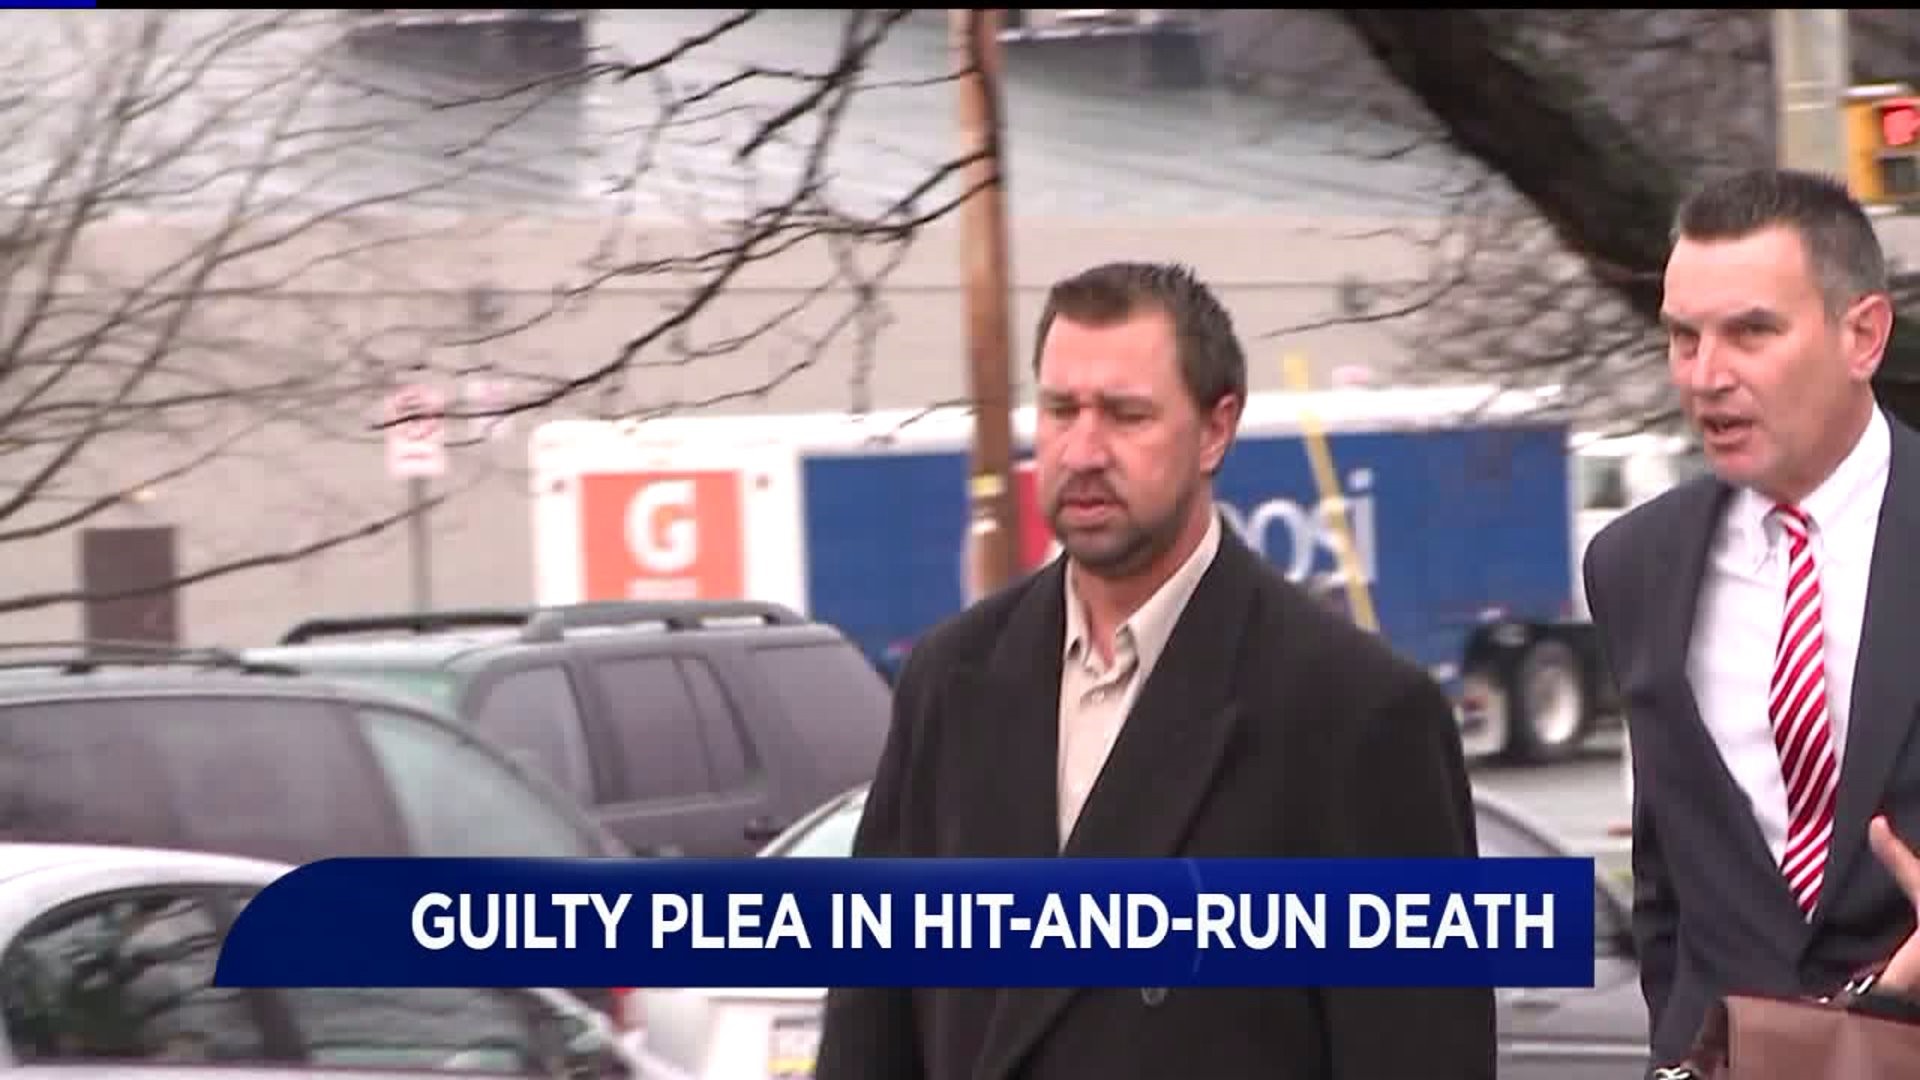 Driver Sentenced to House Arrest after Admitting to Deadly Hit and Run